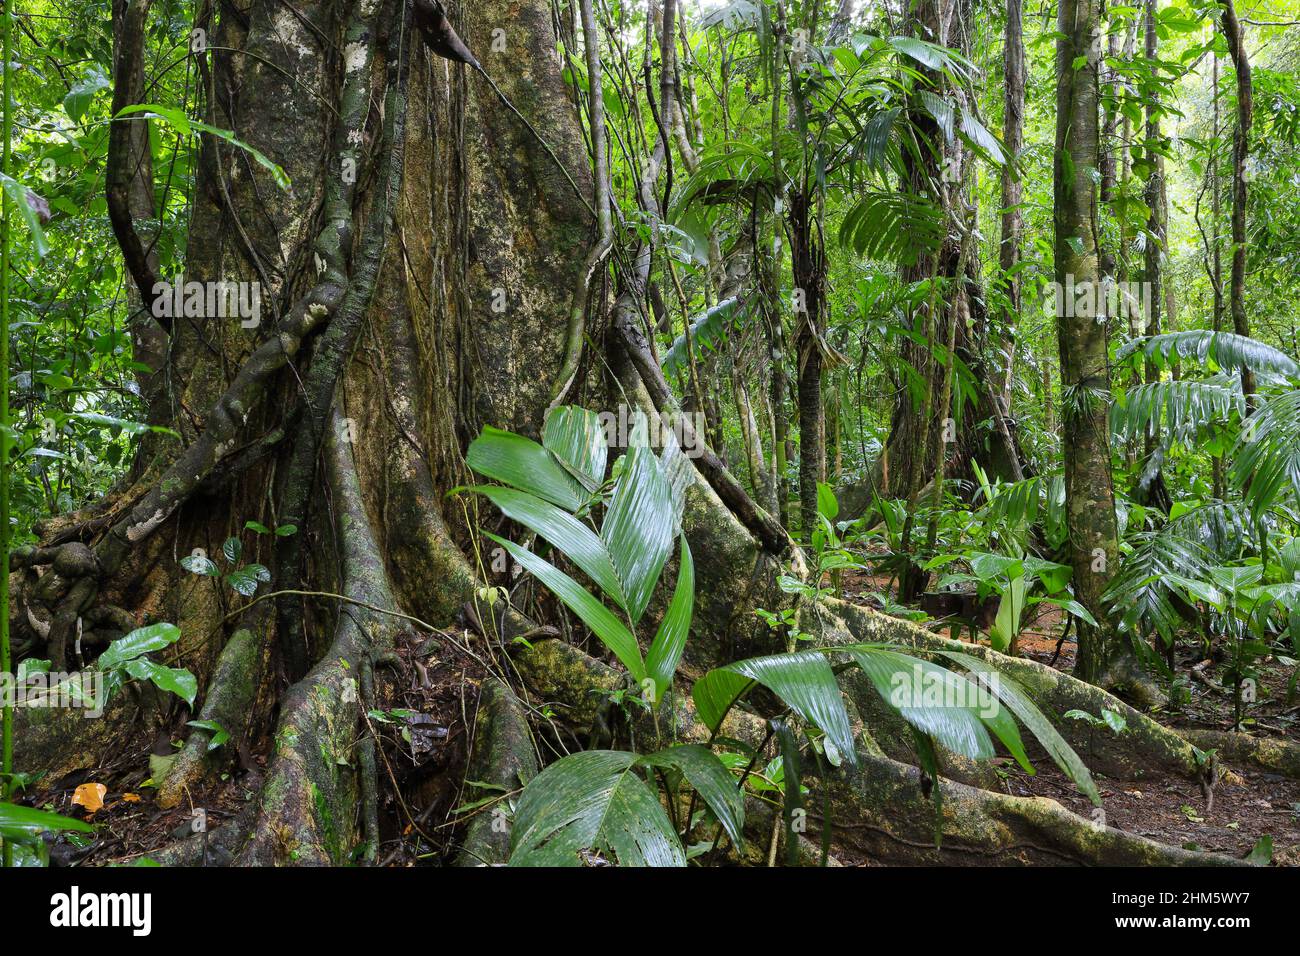 Tree with large buttress roots in primary lowland rainforest, Puerto Viejo de Talamanca, South Caribbean coast, Costa Rica. Stock Photo